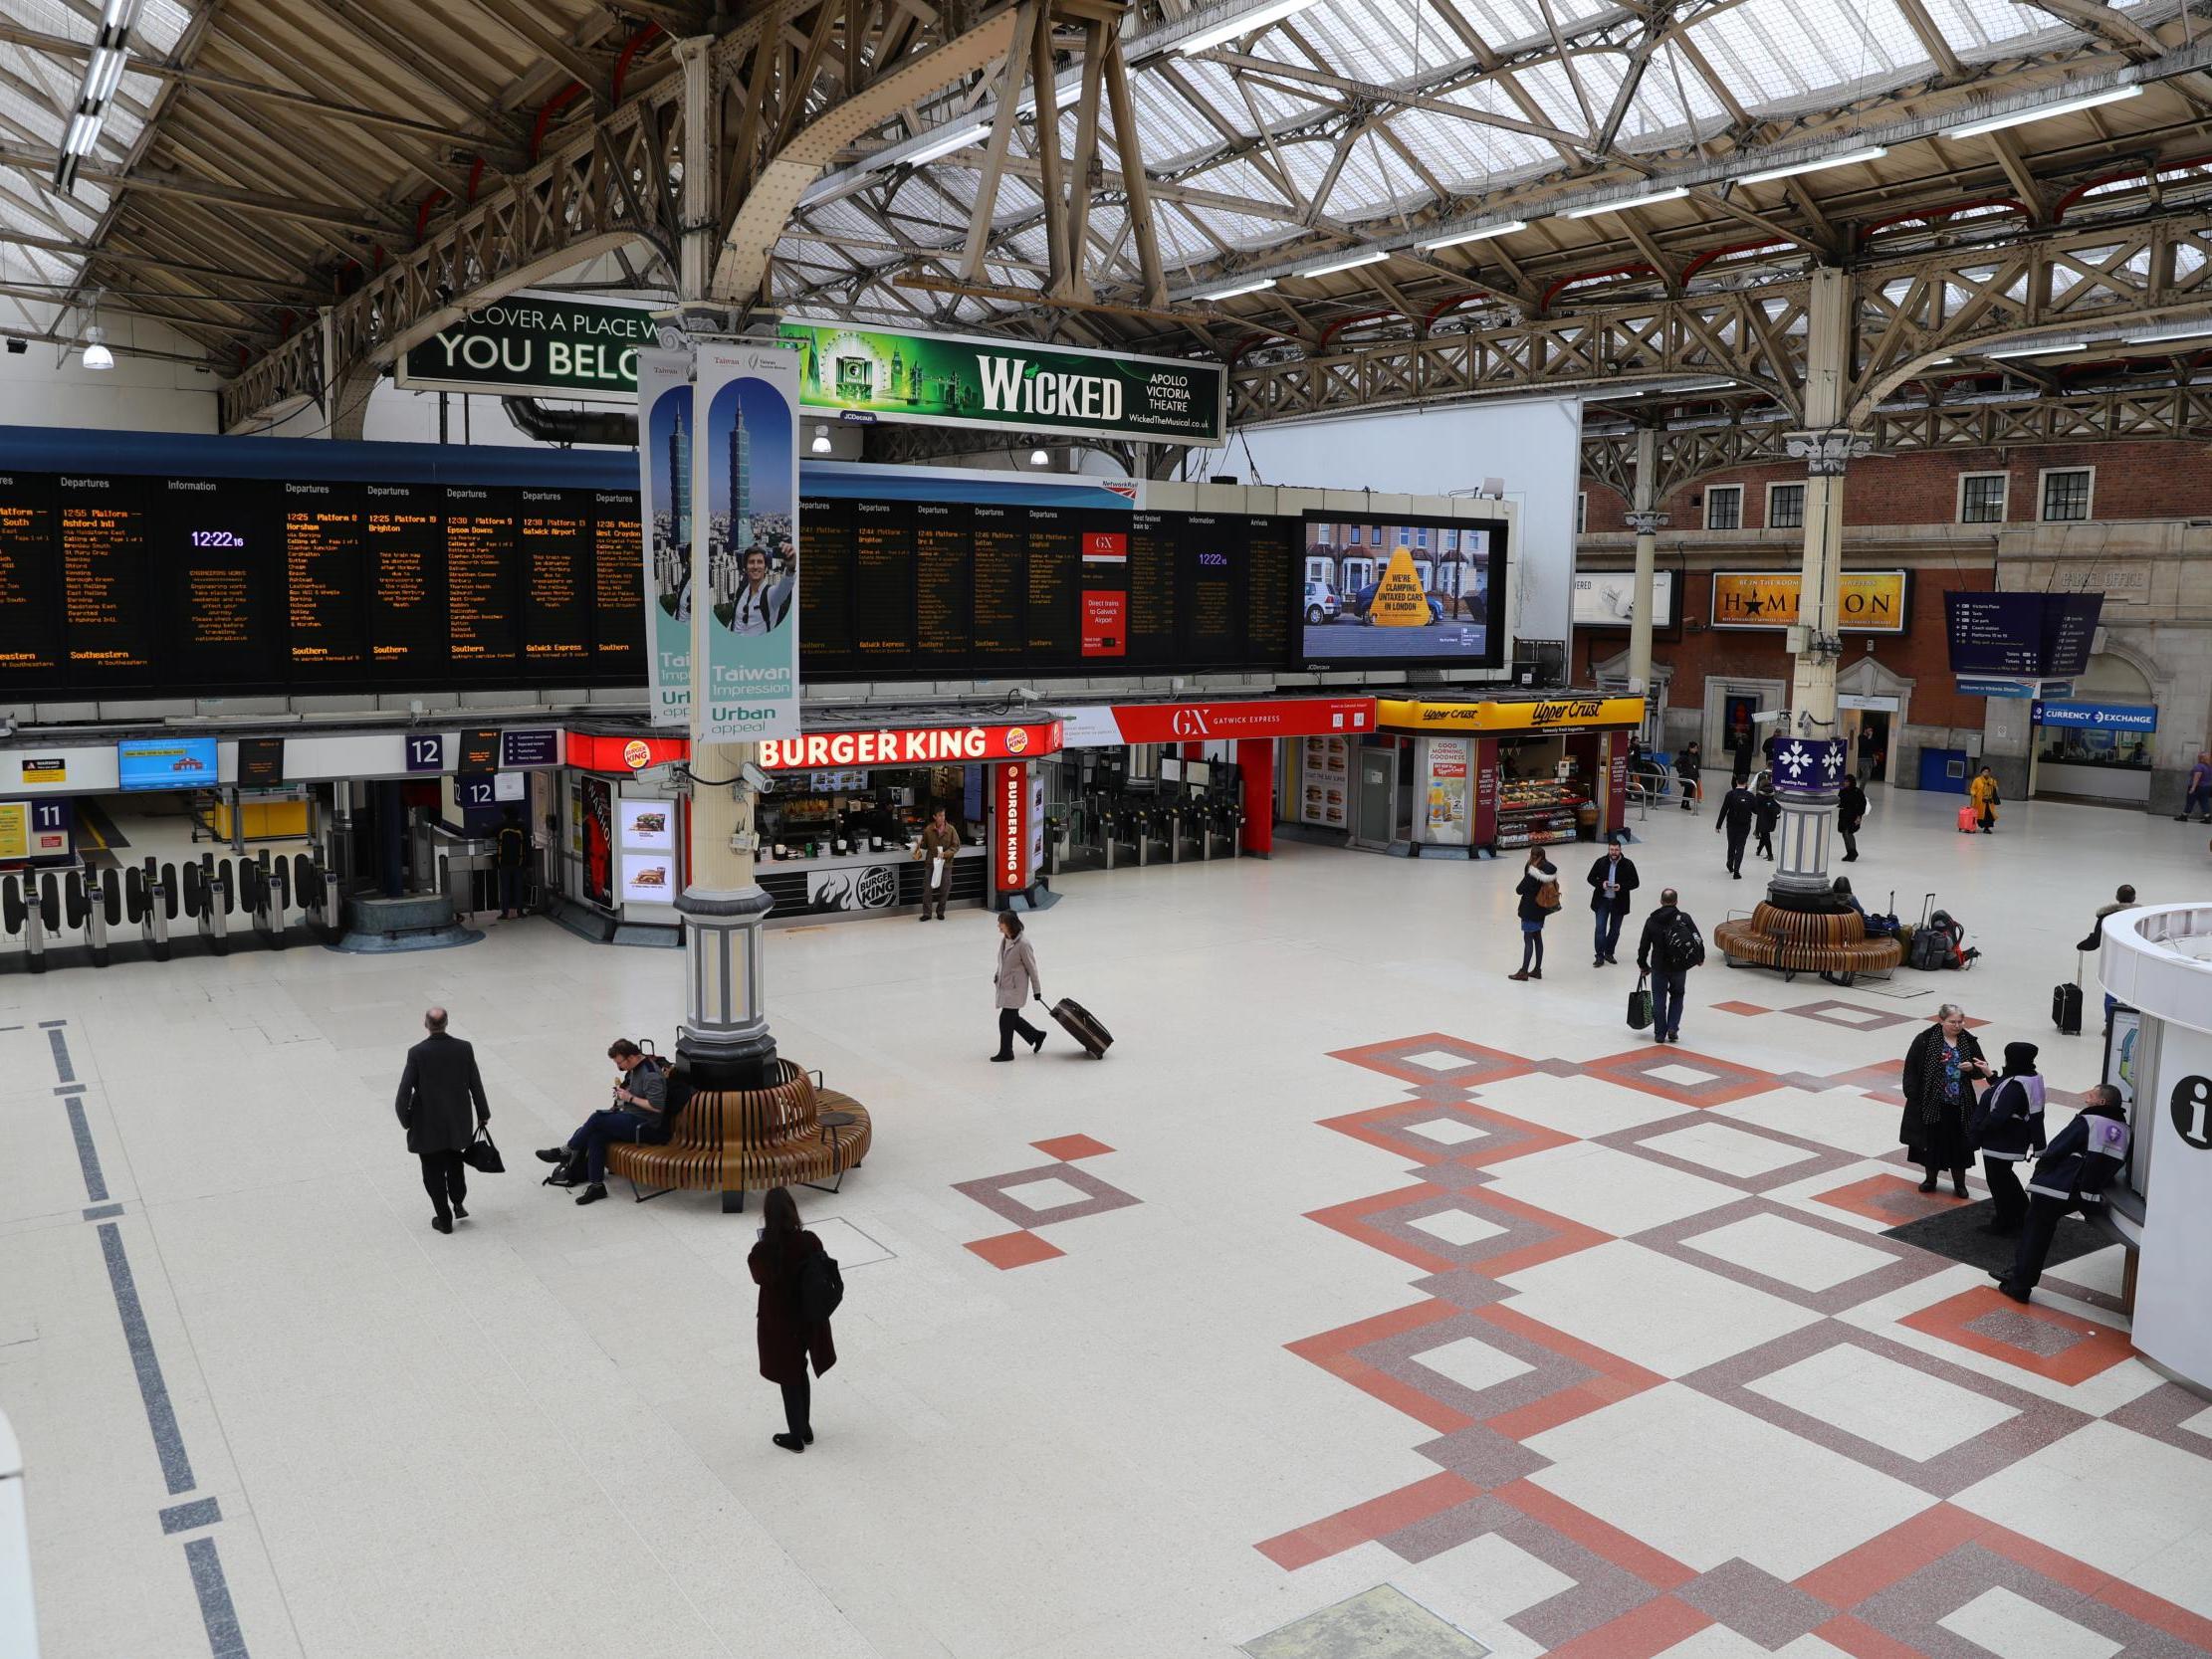 London's busy stations have been unusually quiet of late as millions of office staff work from home - a trend that looks set to continue beyond the pandemic